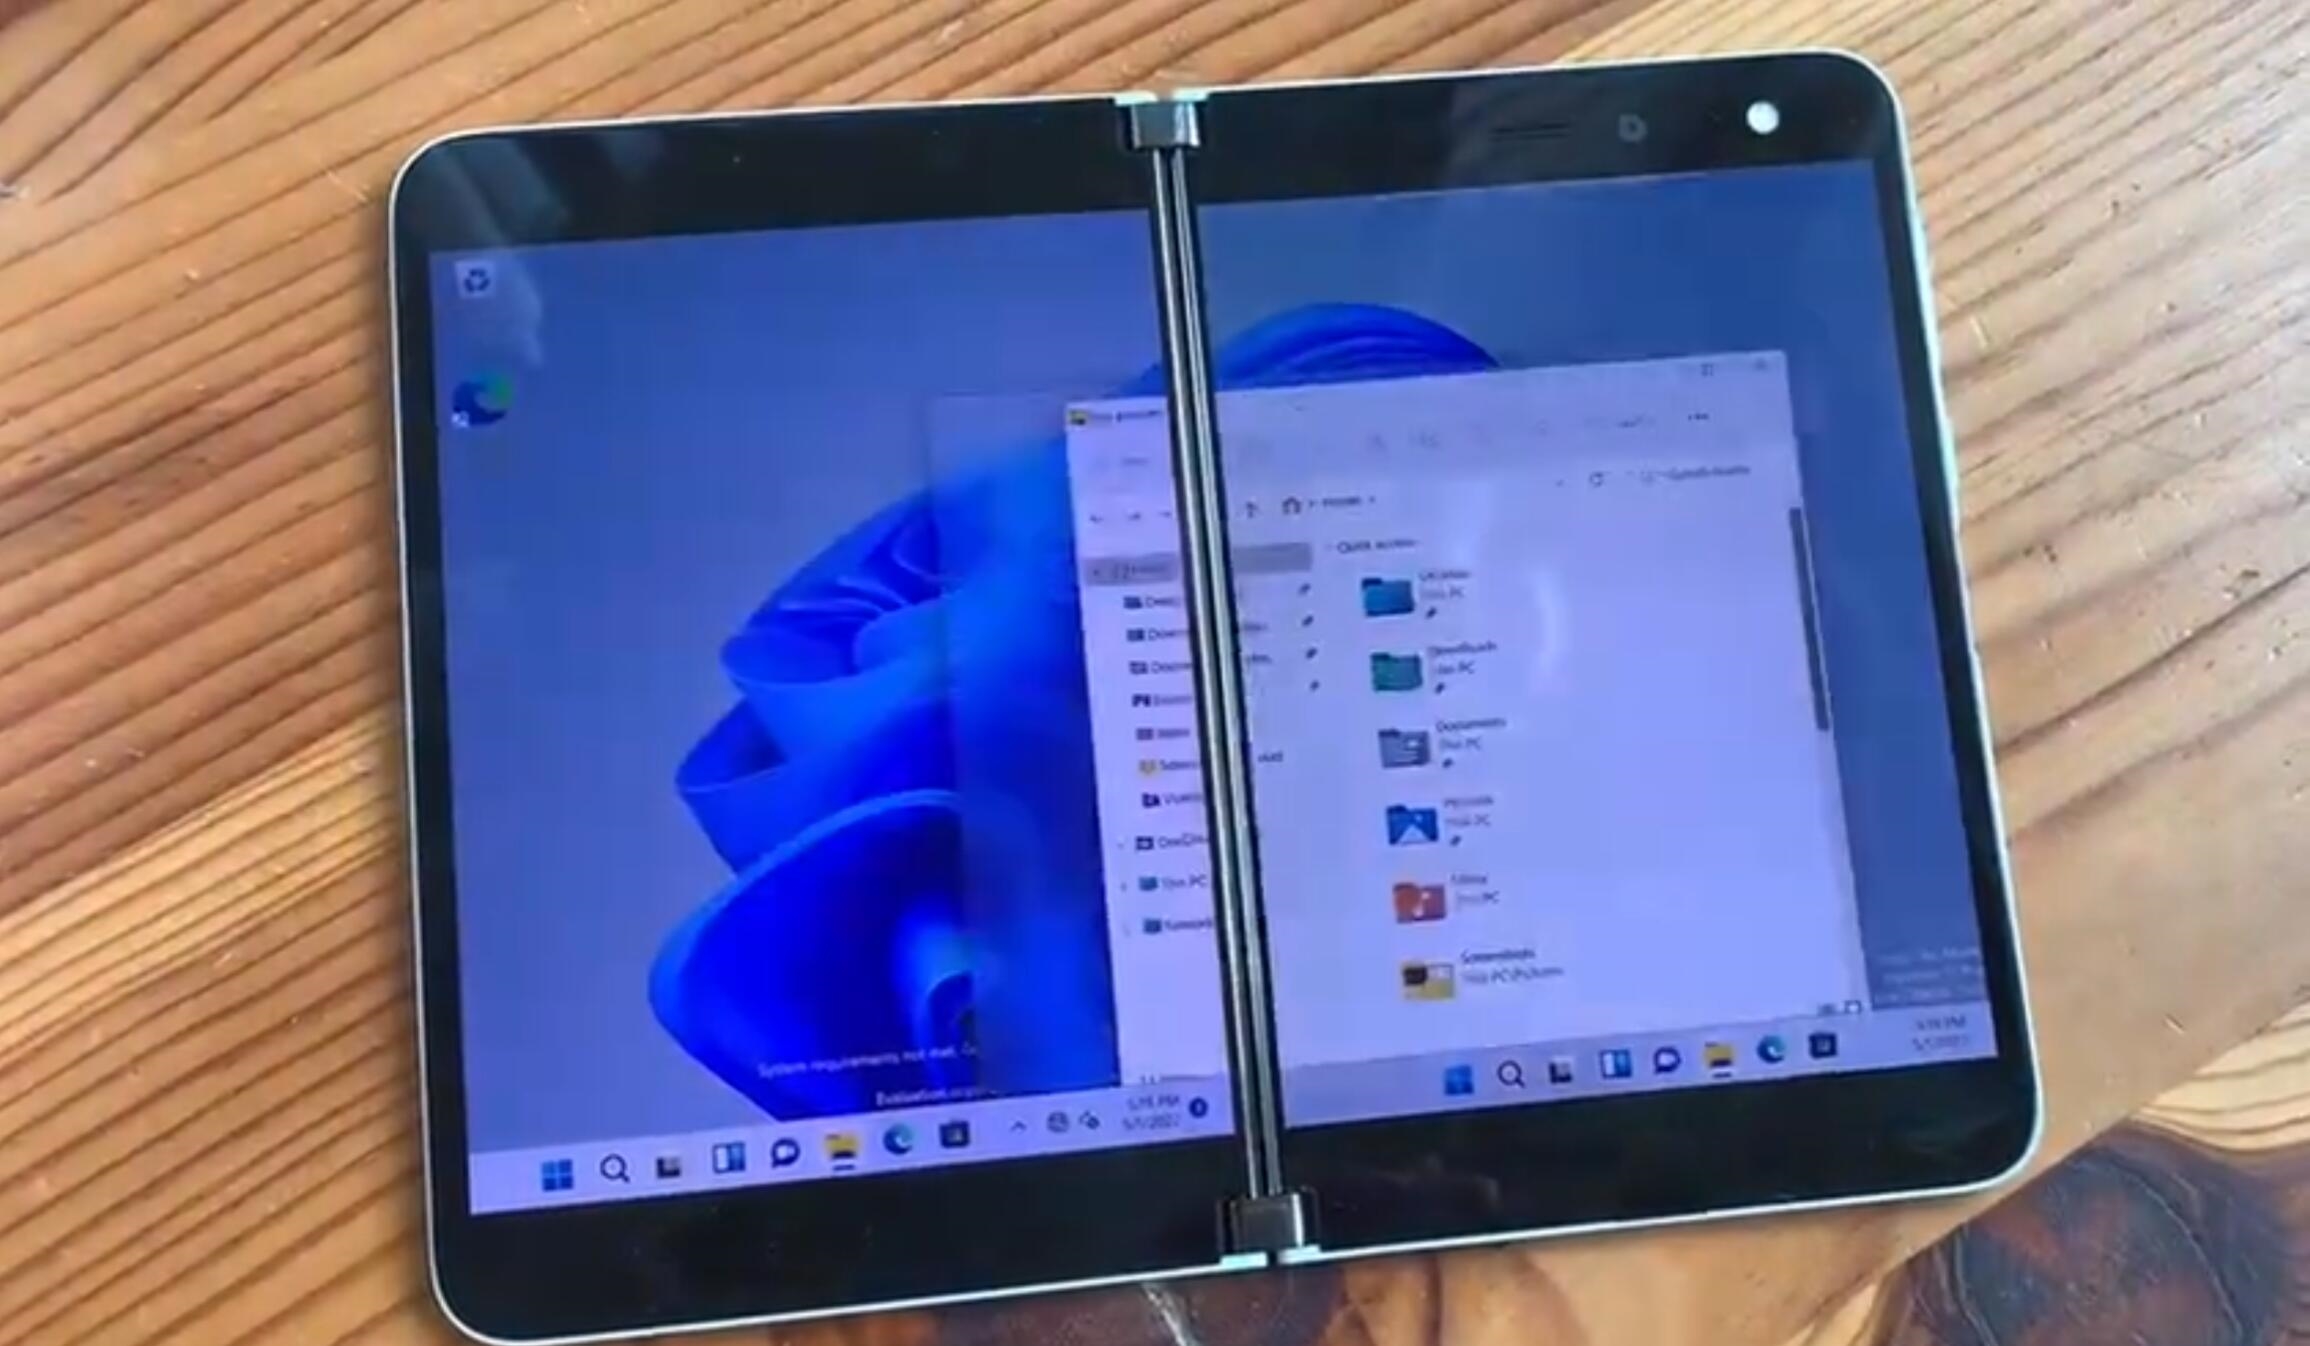 Windows 11 installed on Android smartphone Surface Duo: Microsoft Edge browser works